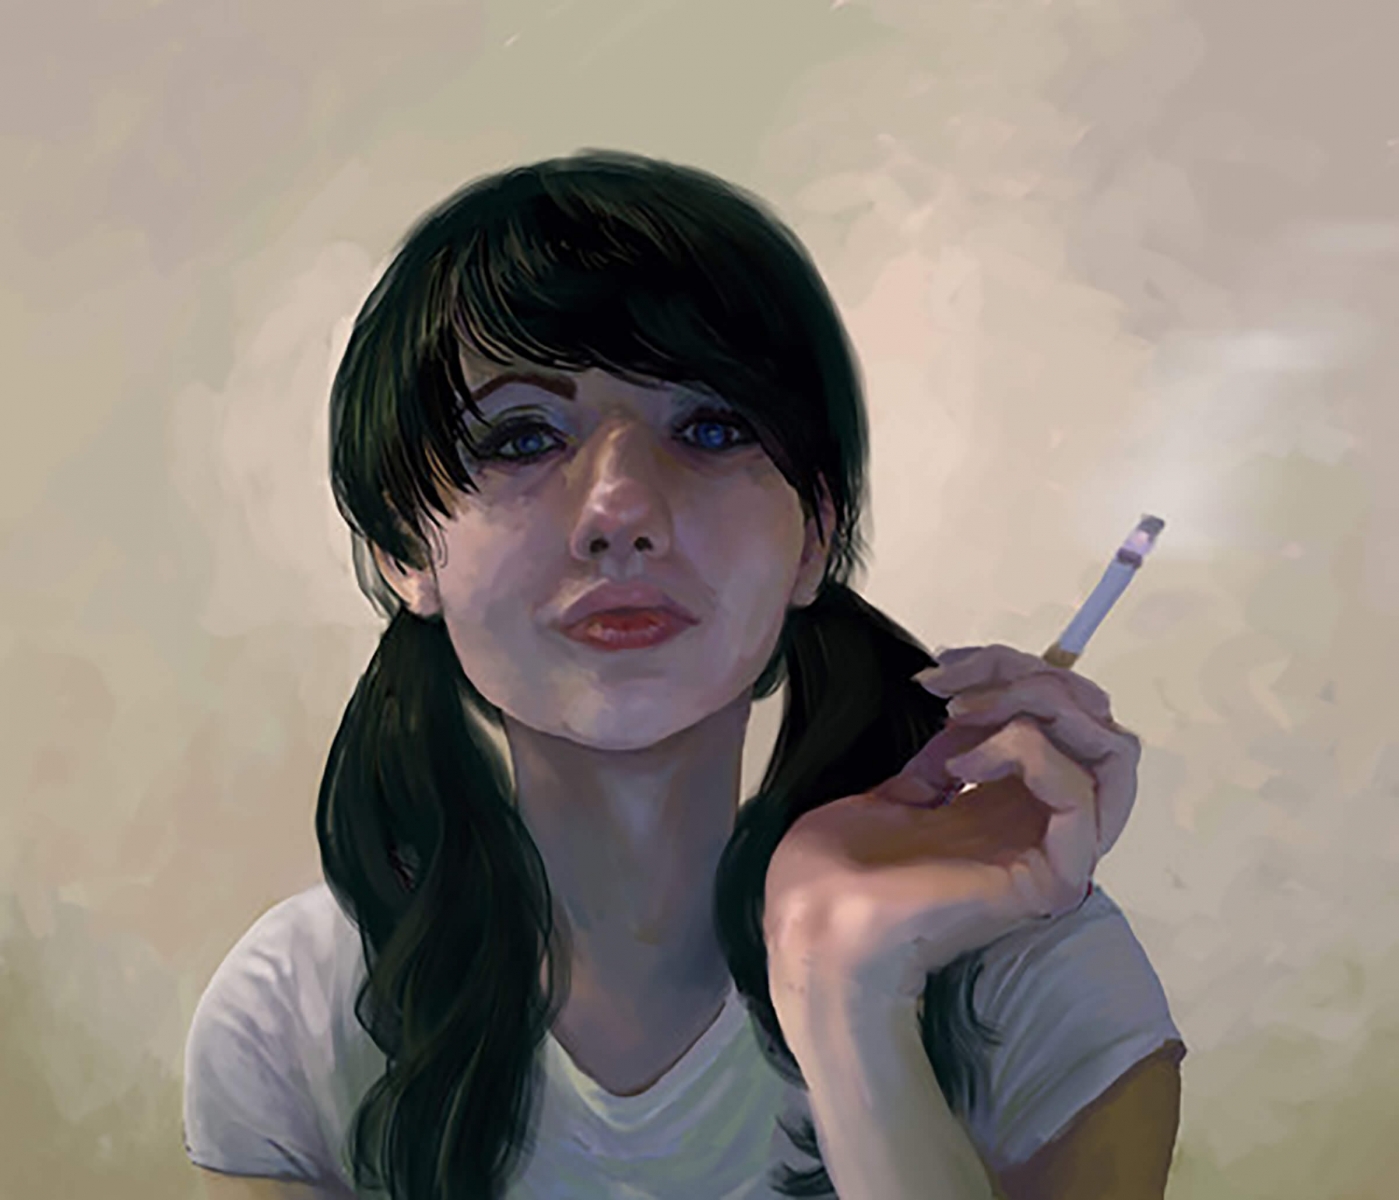 traditional painting portrait of a young woman in pigtails smoking a cigarette